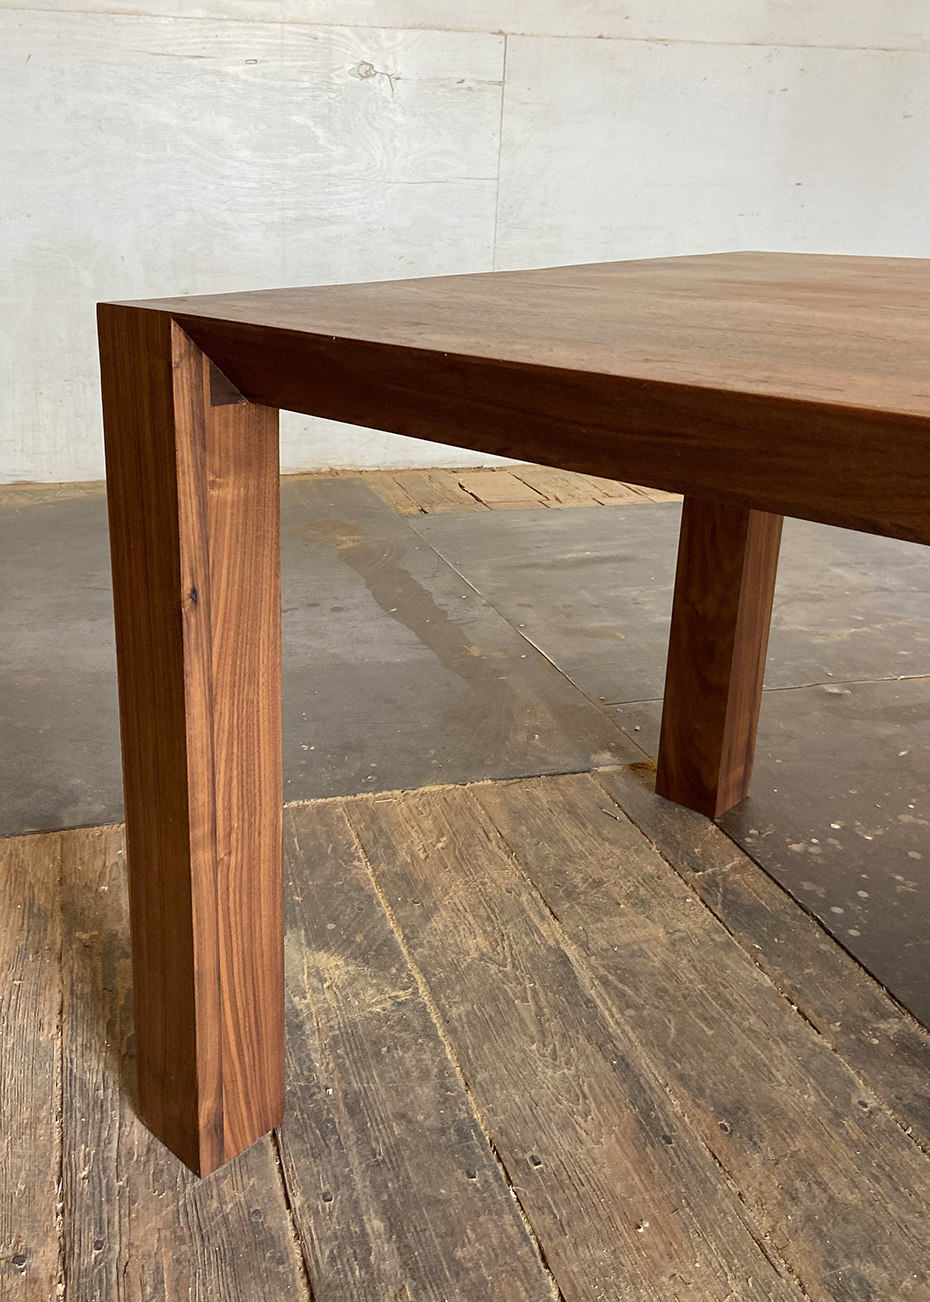 Disappearing Edge Dining Table